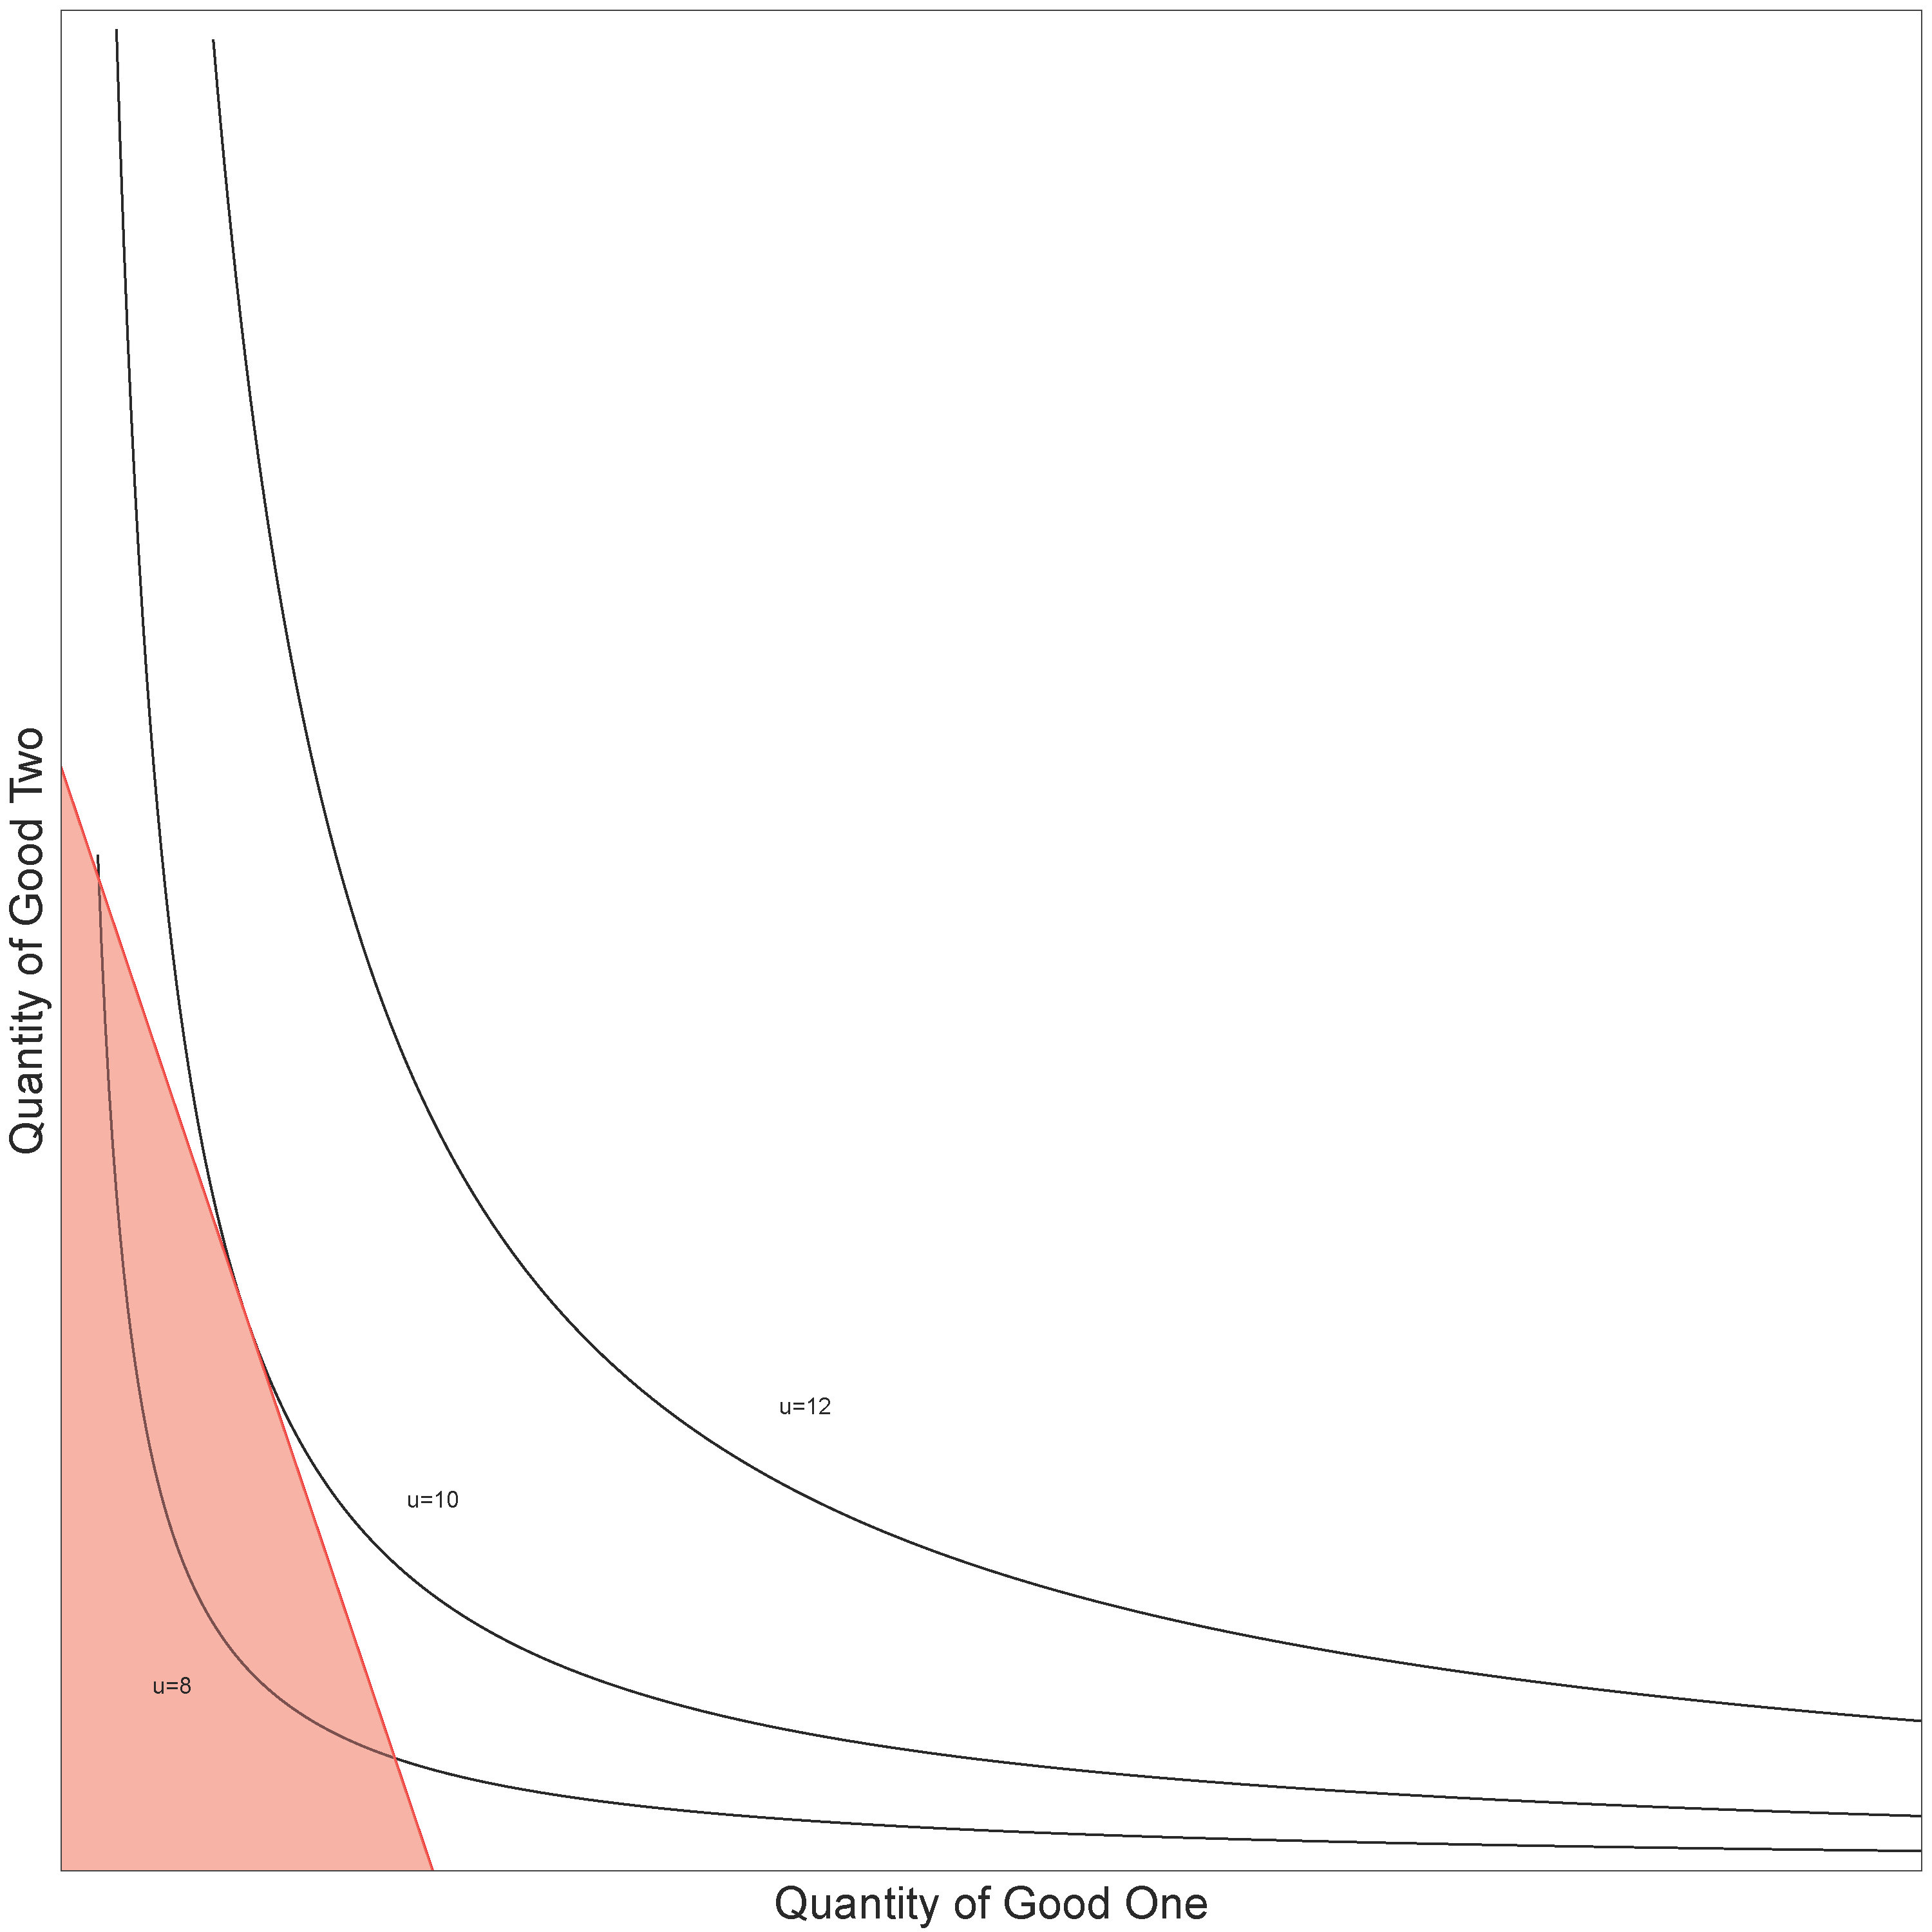 Utility curves which are concave towards the origin, with red triangle covering the bottom left hand corner